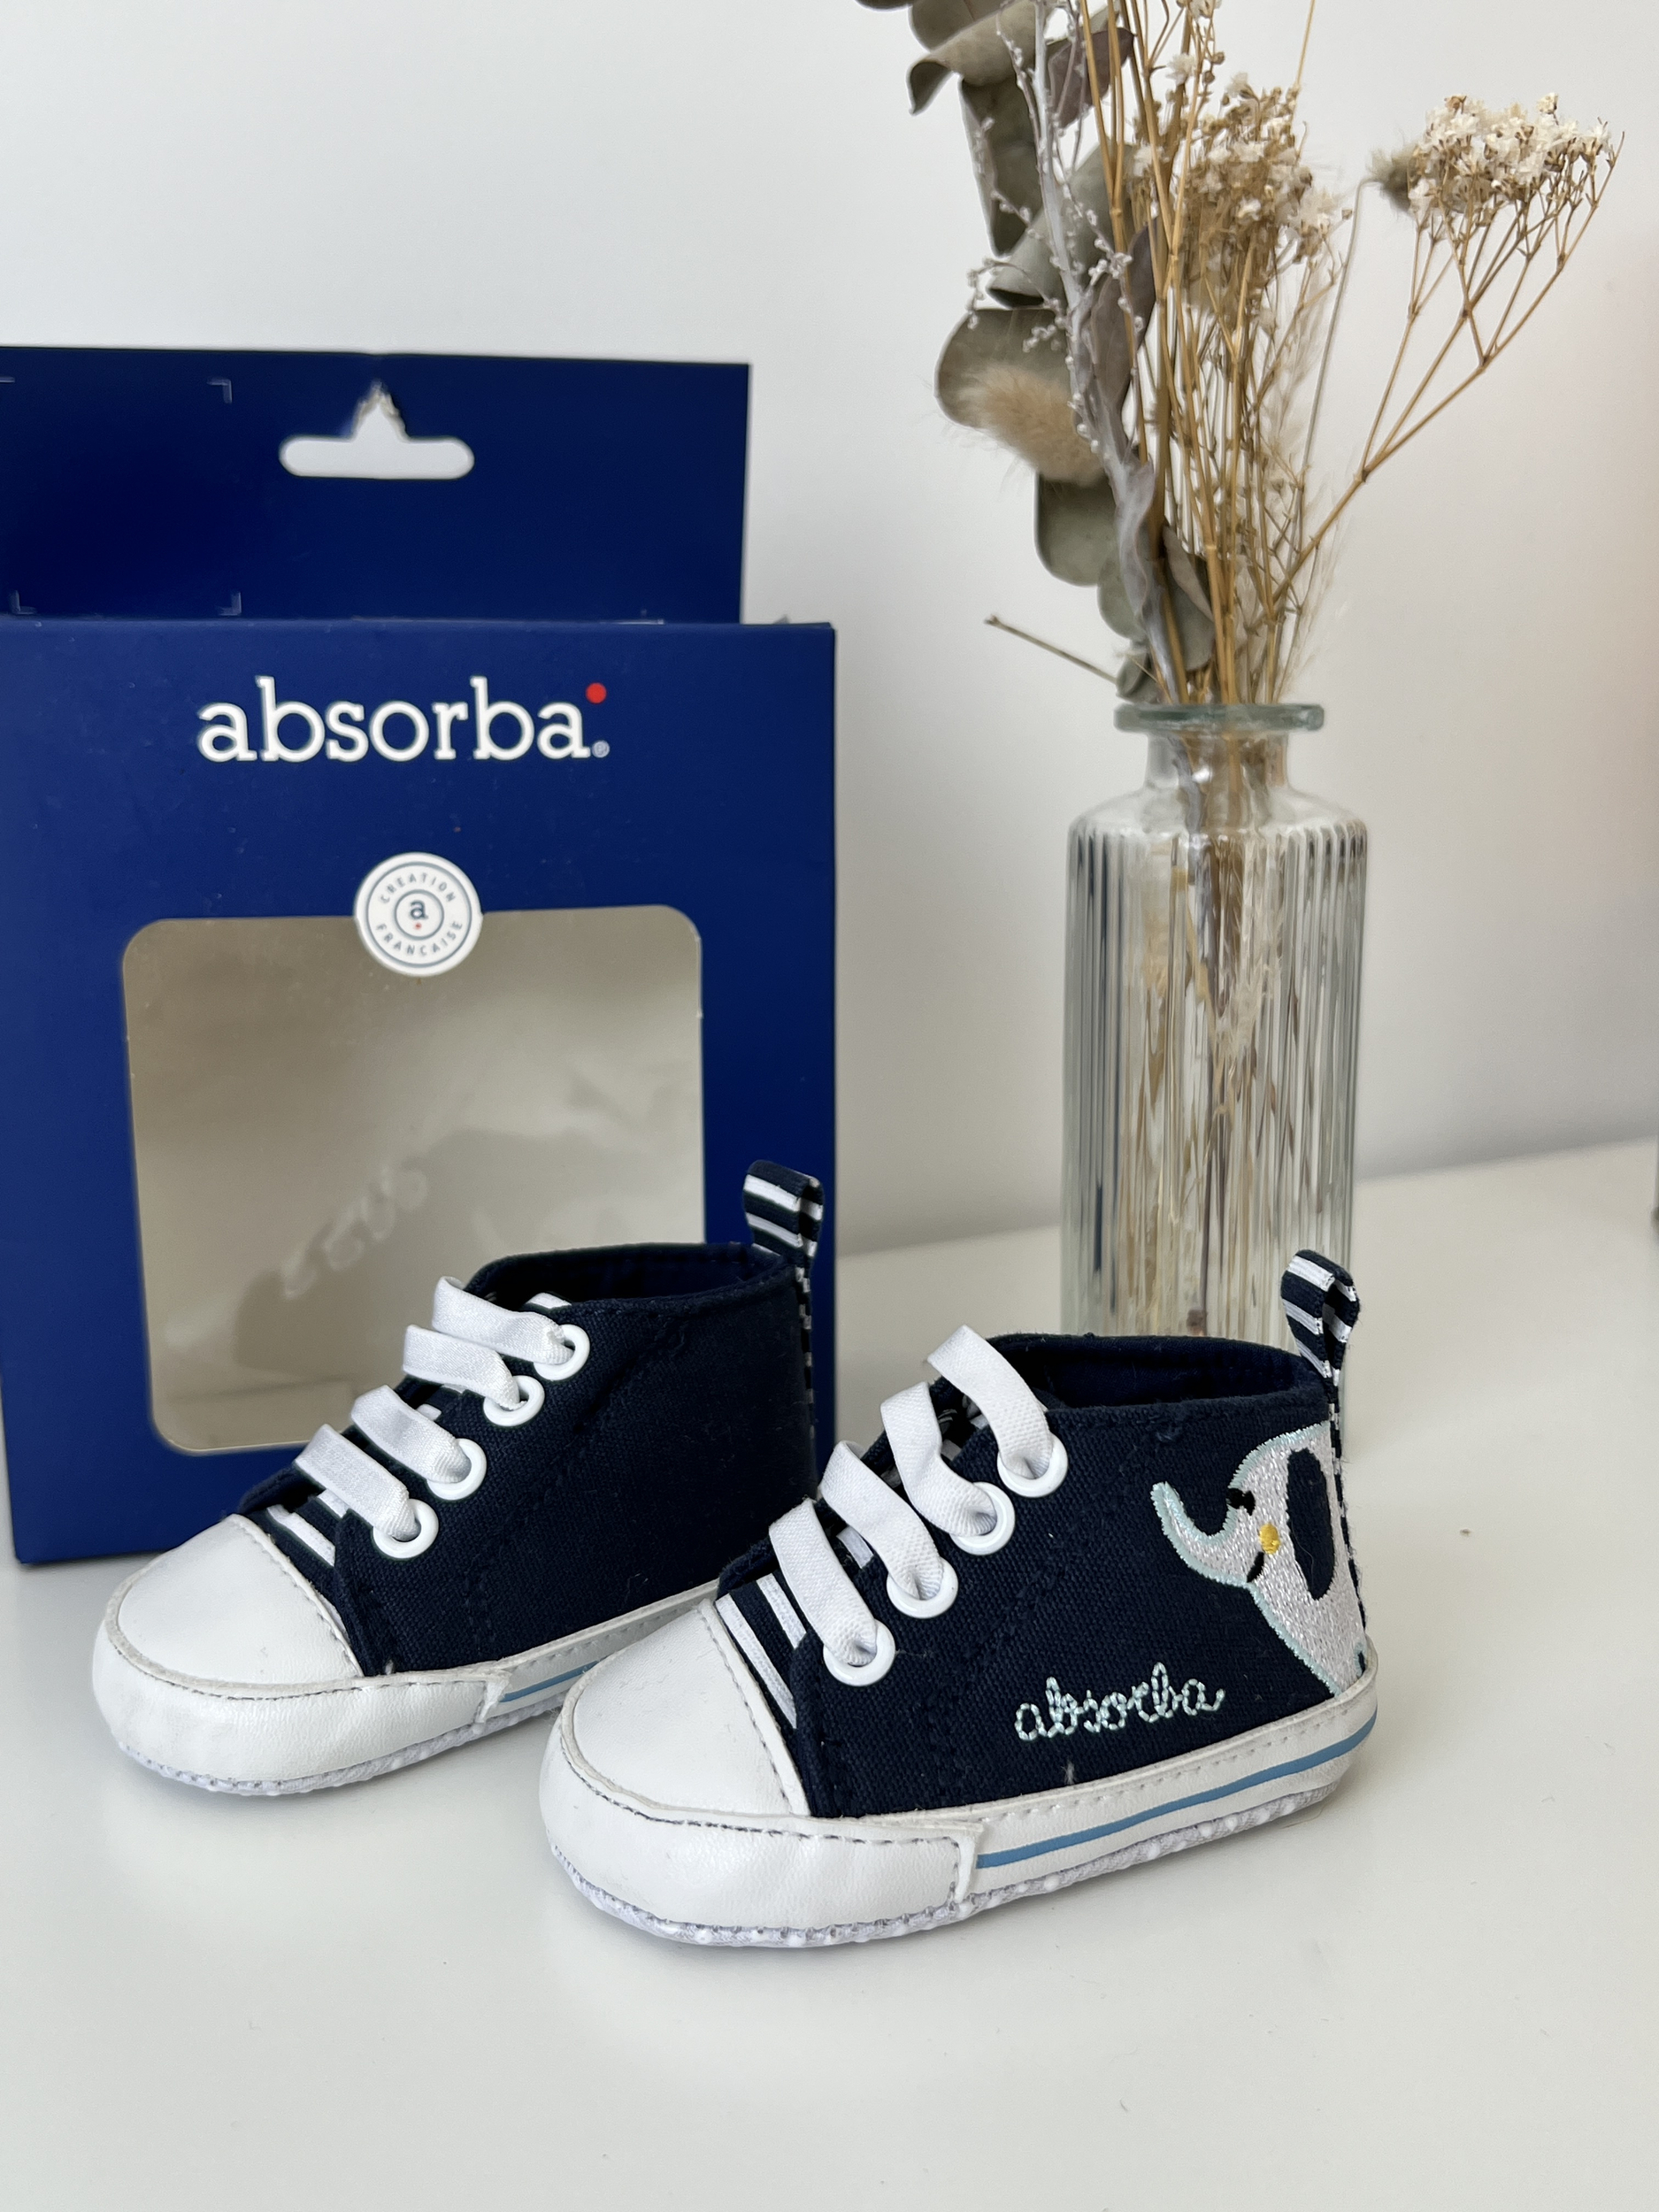 Chaussures bleues - Absorba - 16/17